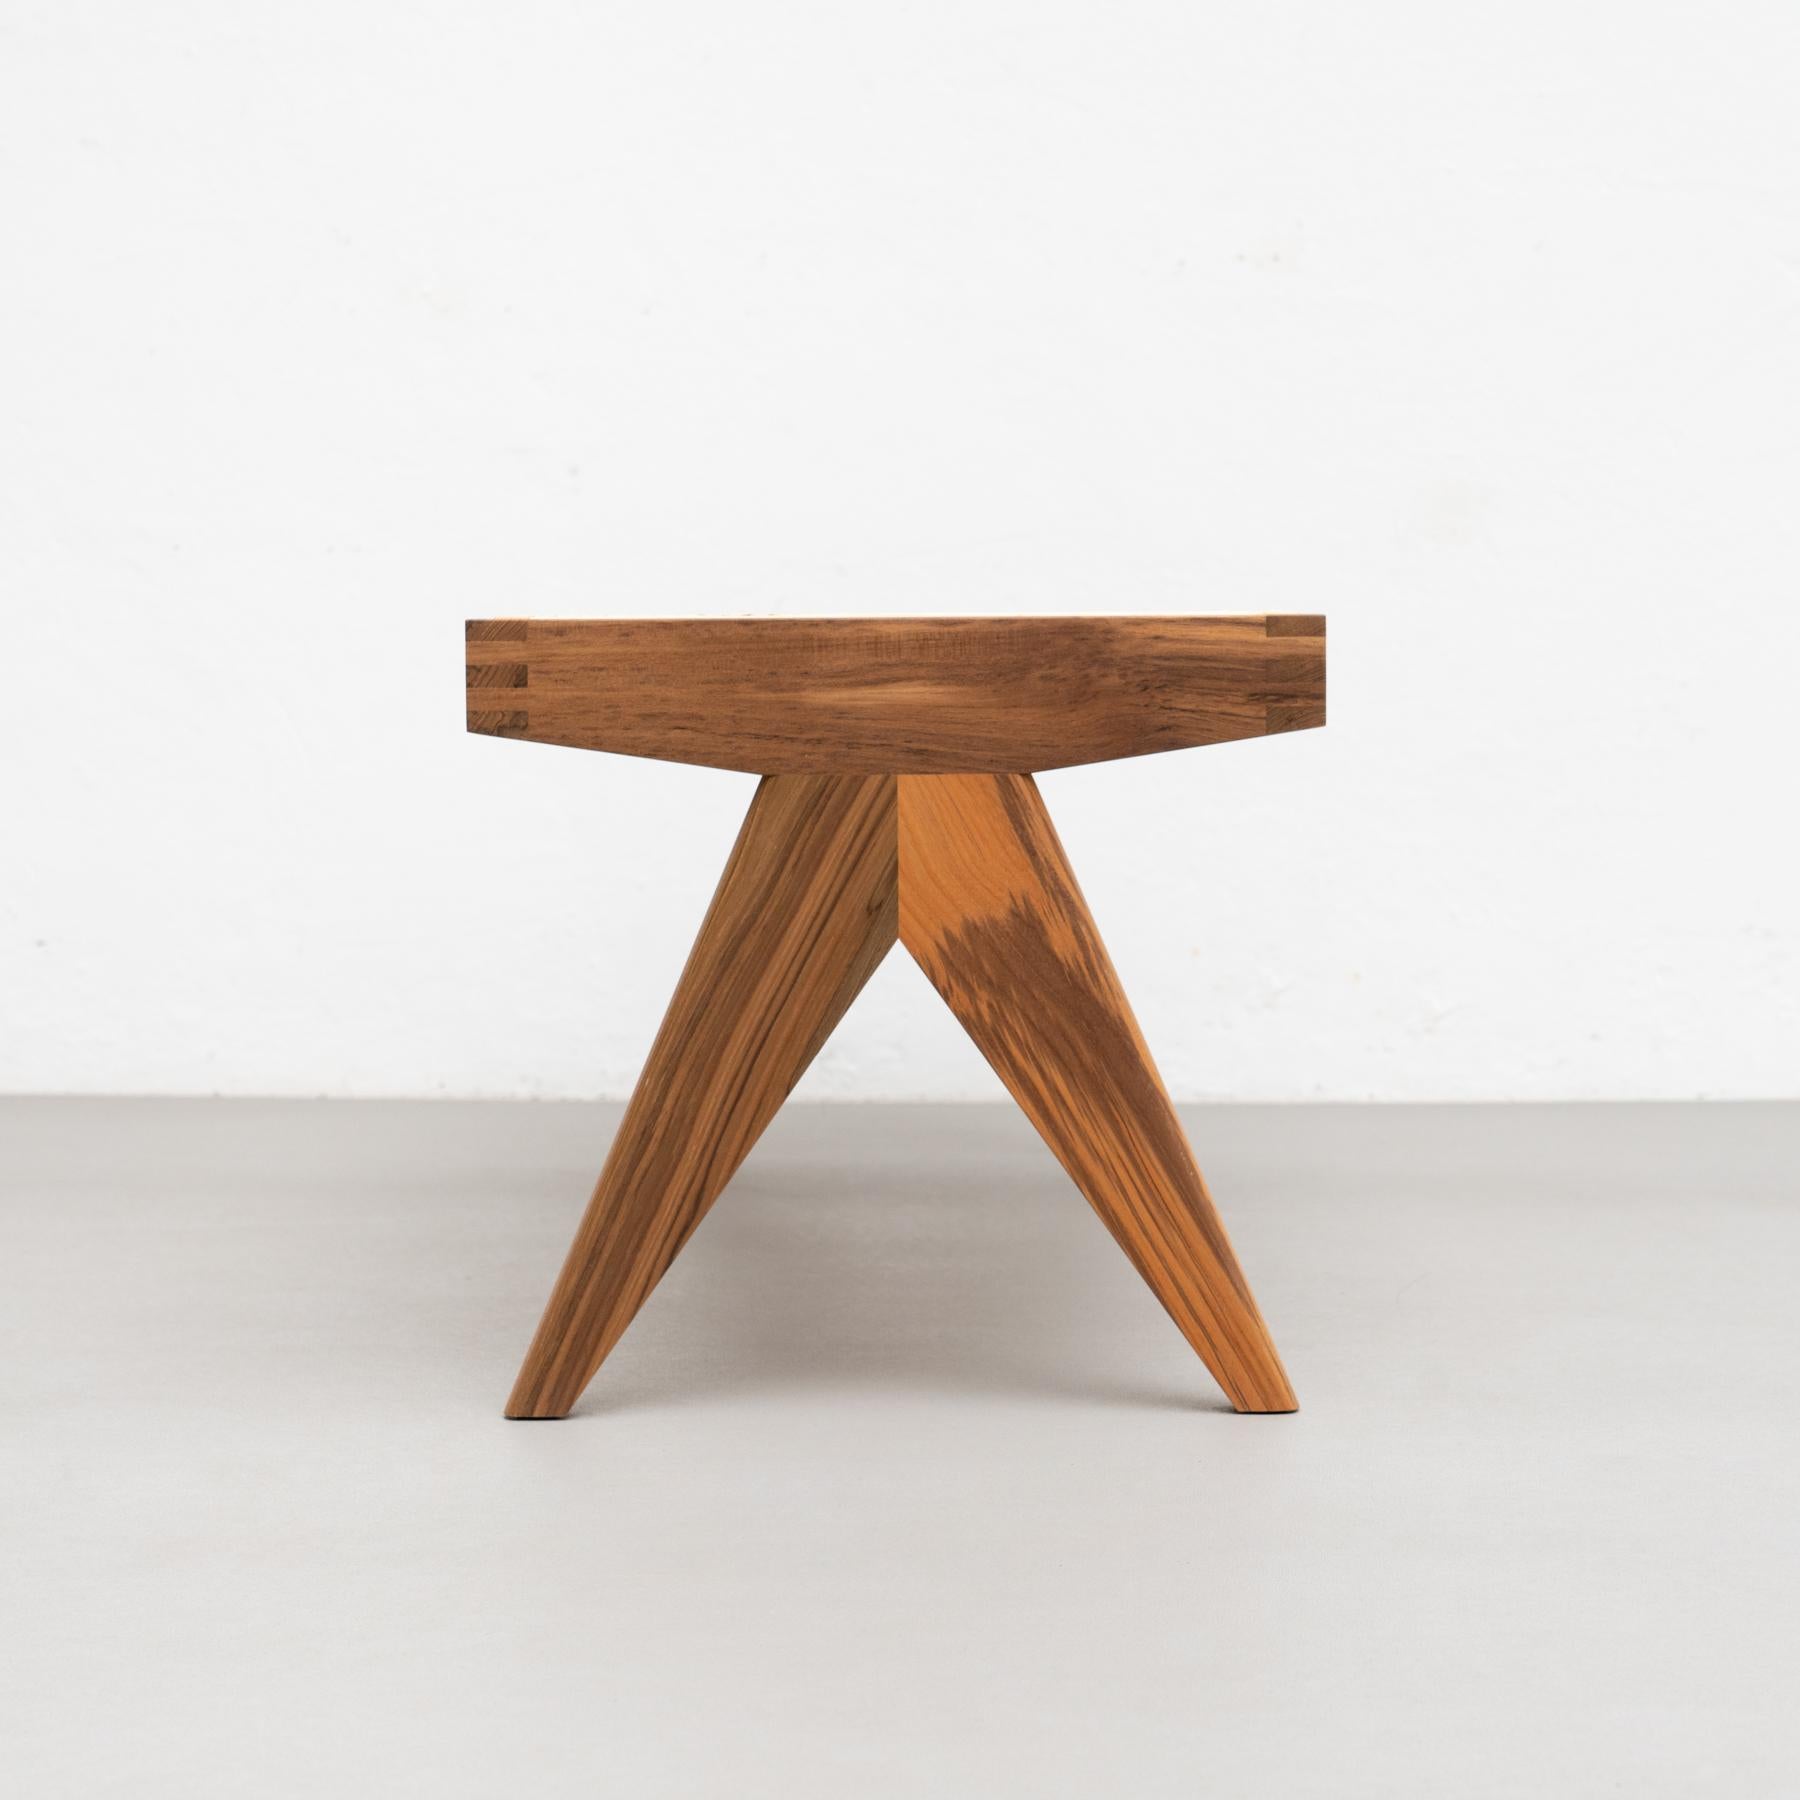 Pierre Jeanneret 057 Civil Bench, Wood and Woven Viennese Cane 7